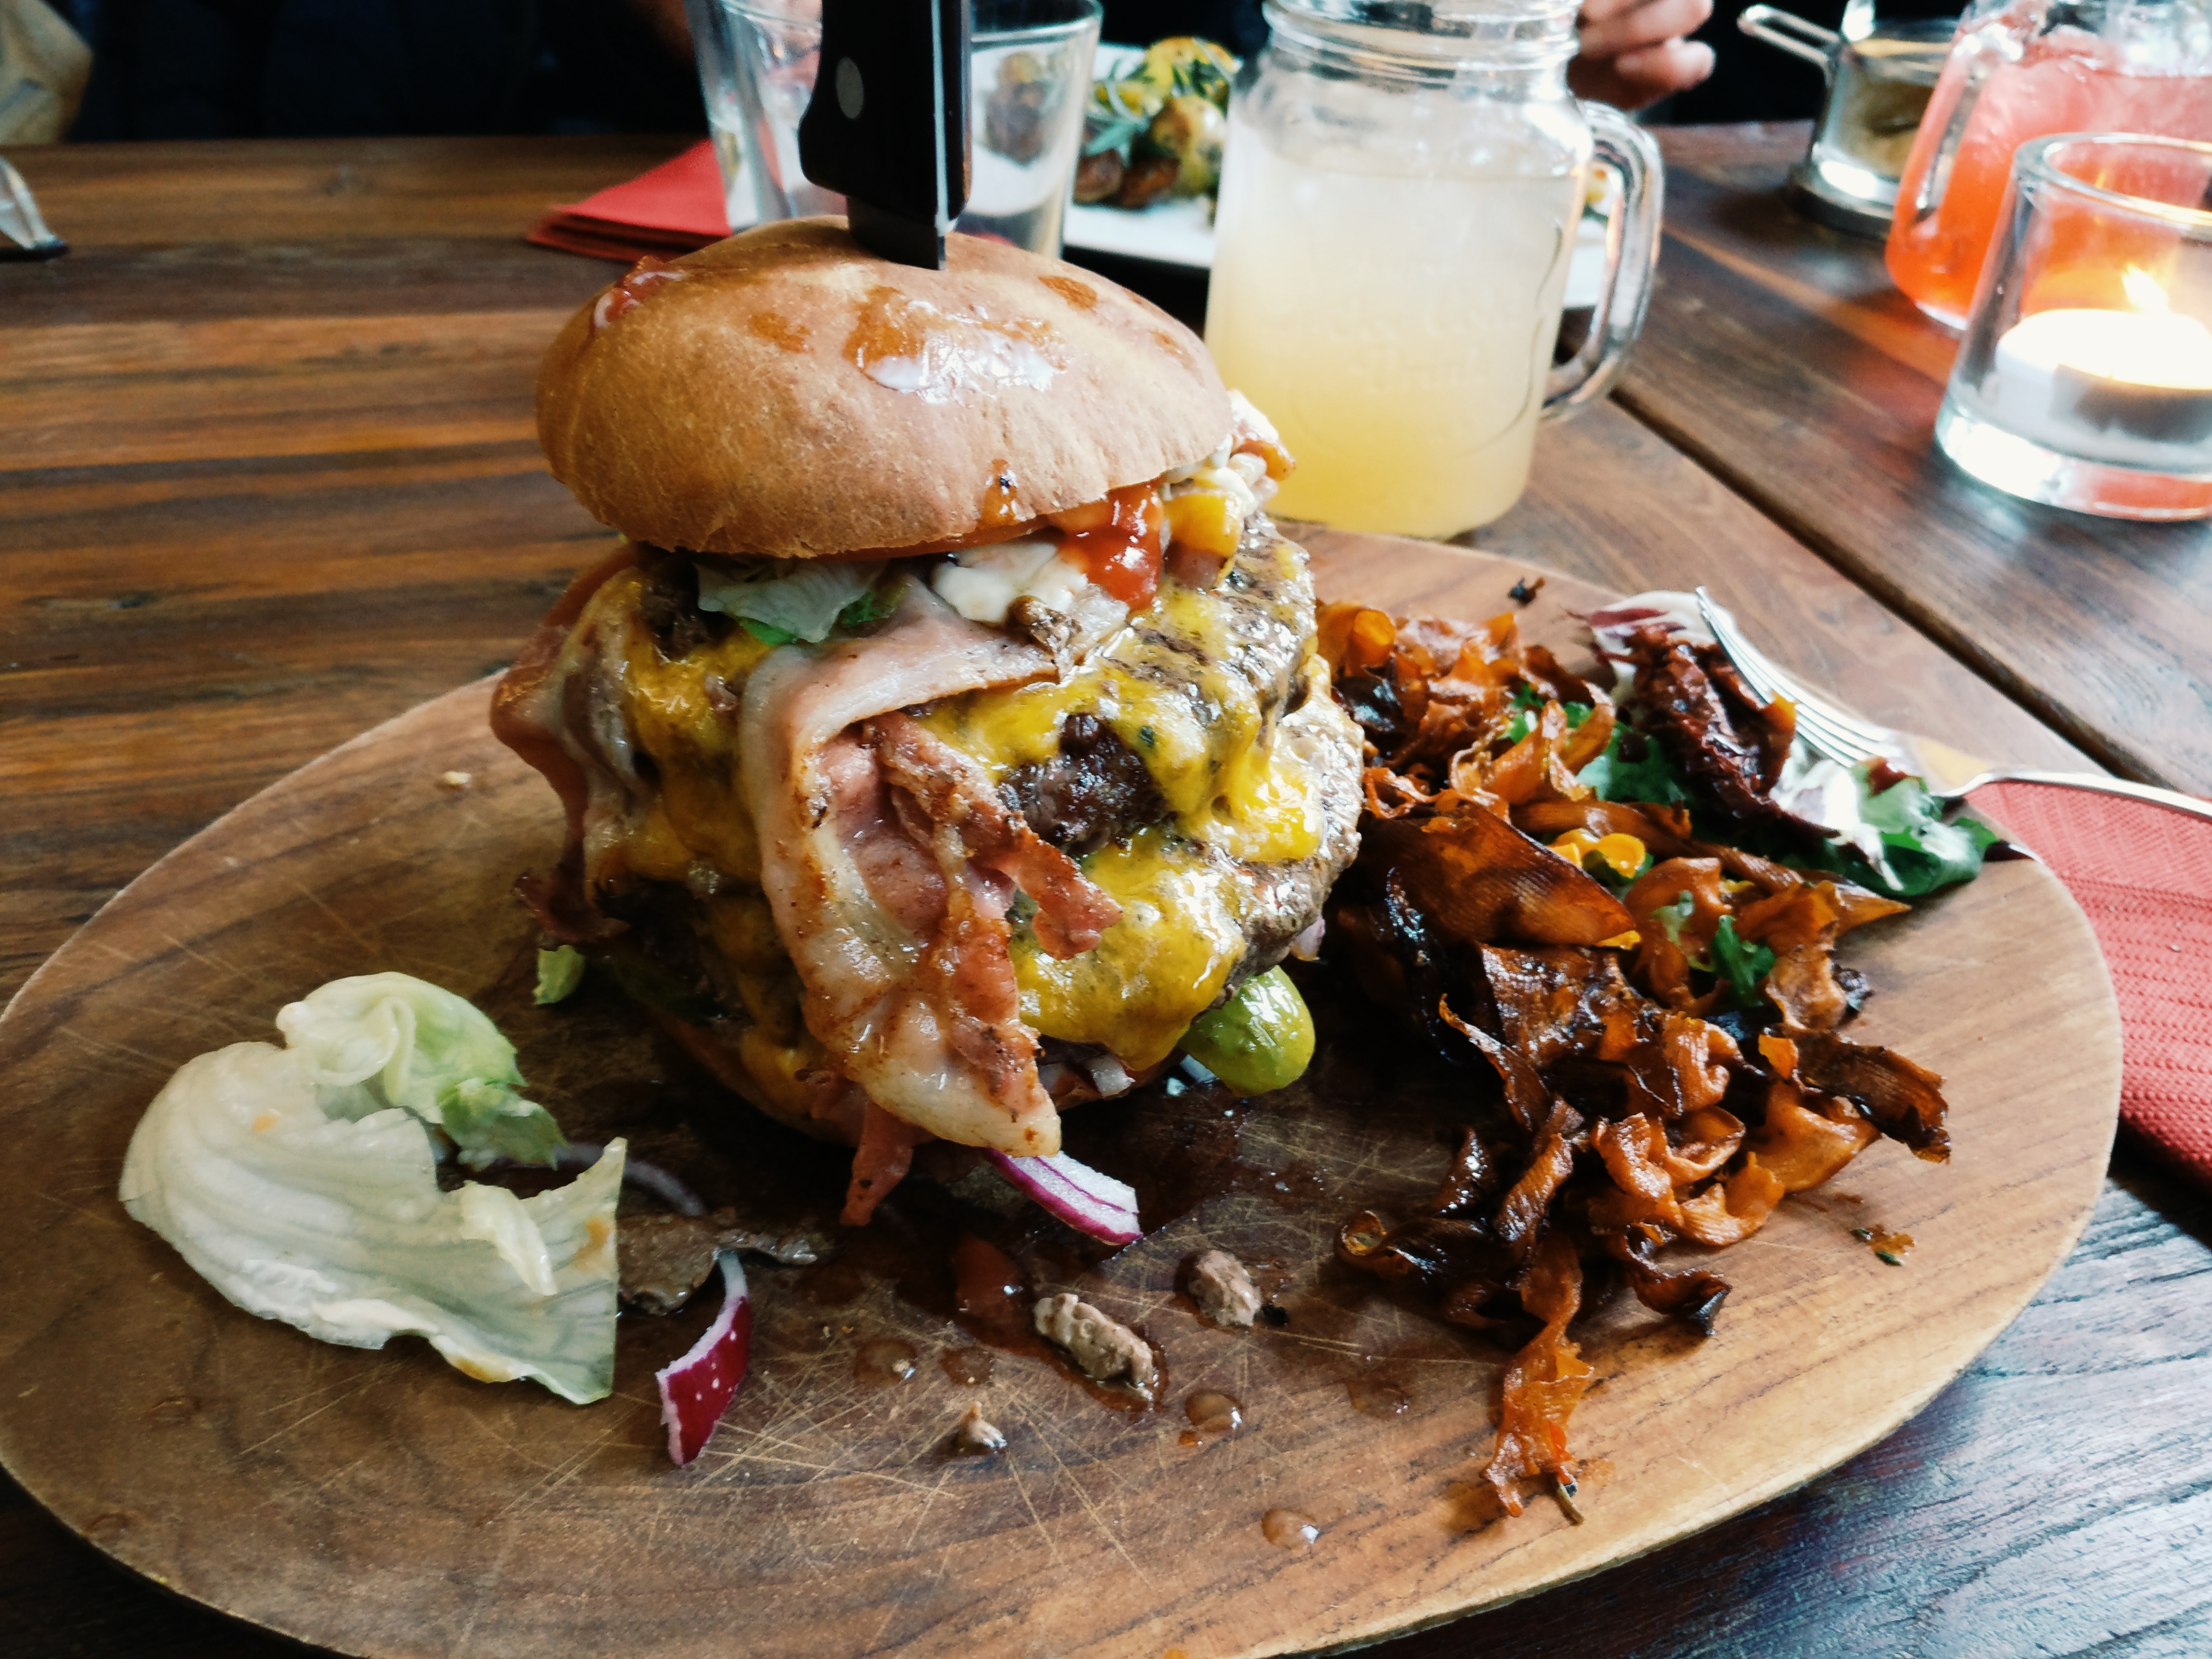 Loaded burger on wooden plate photo